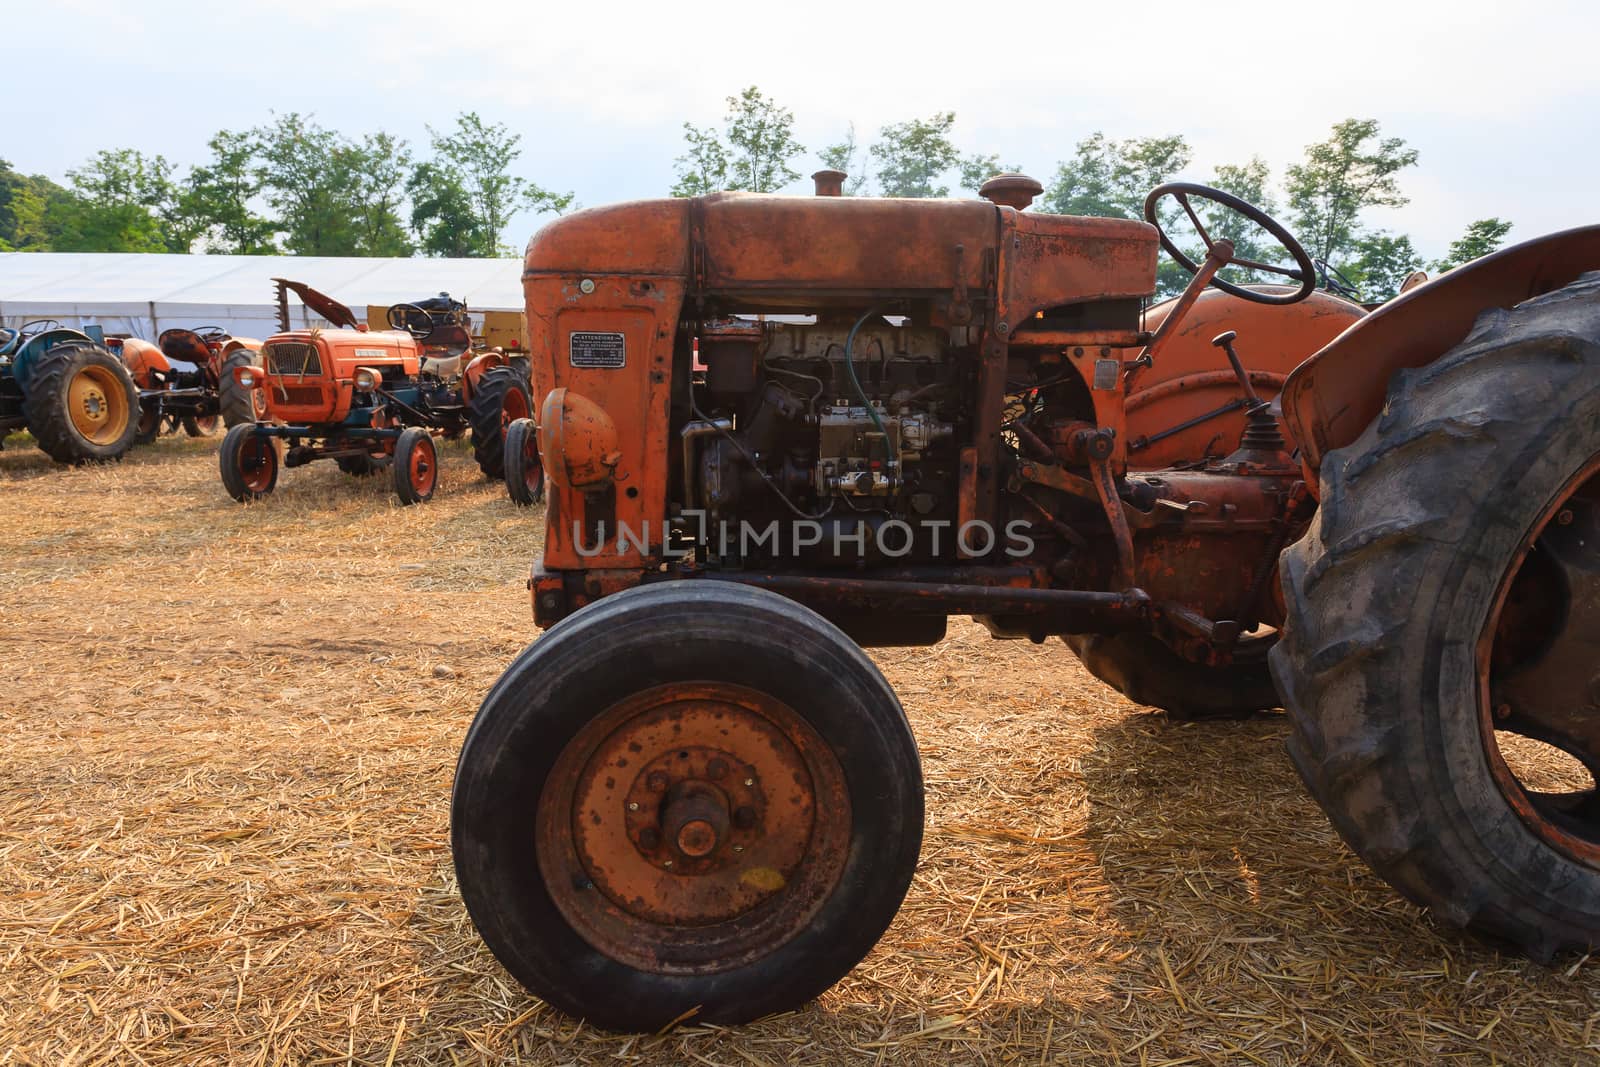 A close up of an old tractor, agriculture, rural life